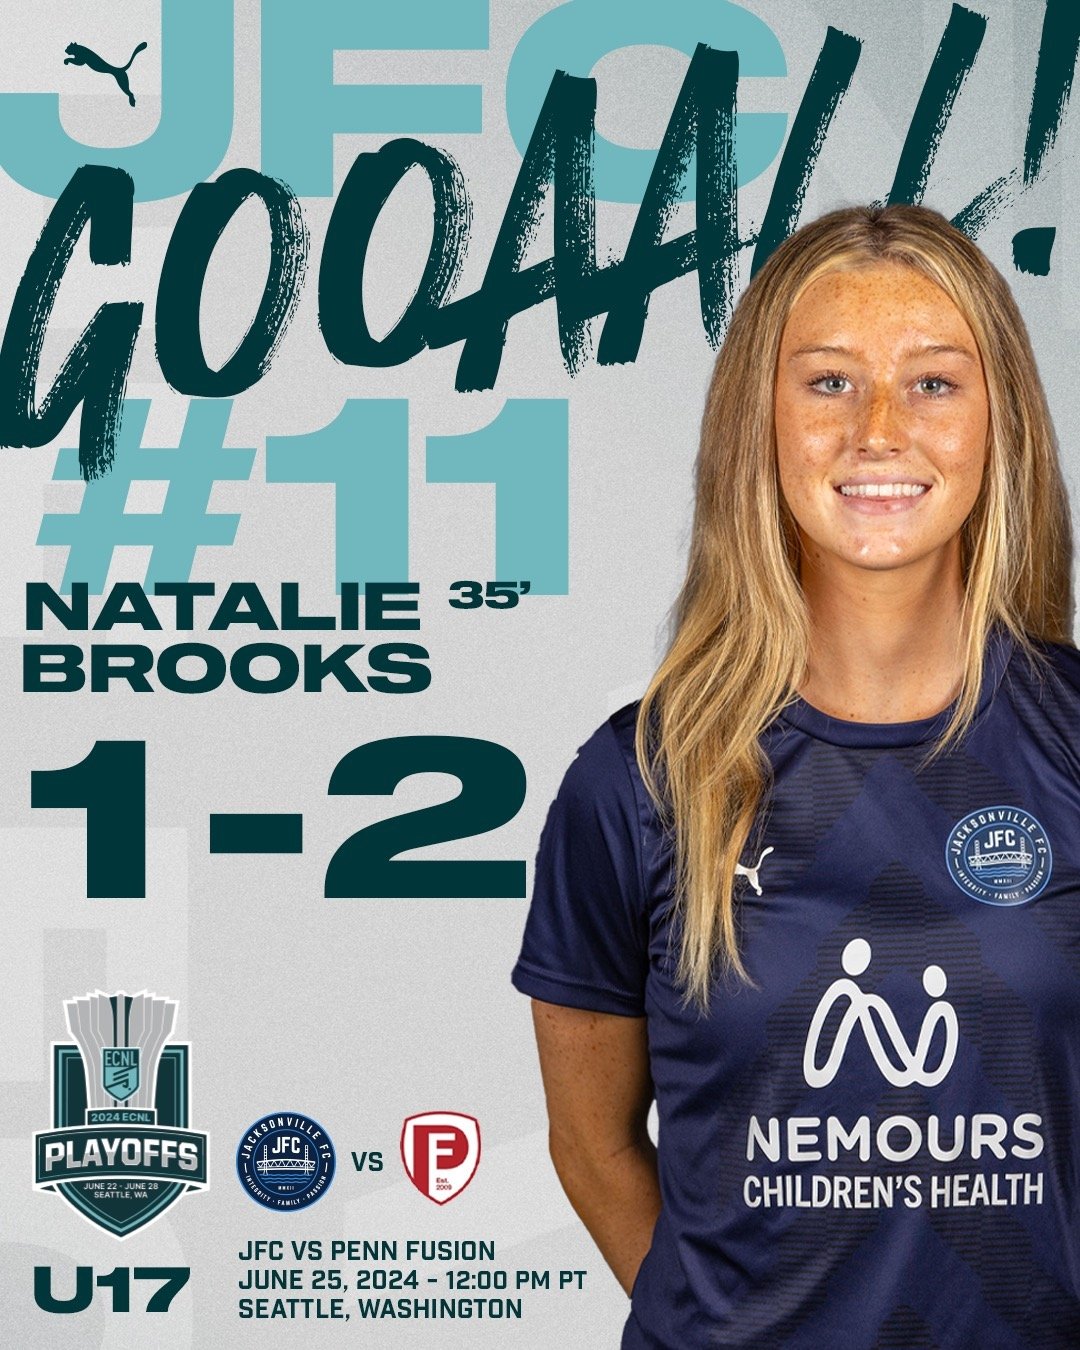 Natalie Brooks gets us on the board in the 35th minute. Down 2-1 to Penn Fusion as we approach halftime in Seattle. 

Plenty more work to do and plenty of time, lets go girls!!!

#PlayerDriven #904JFC